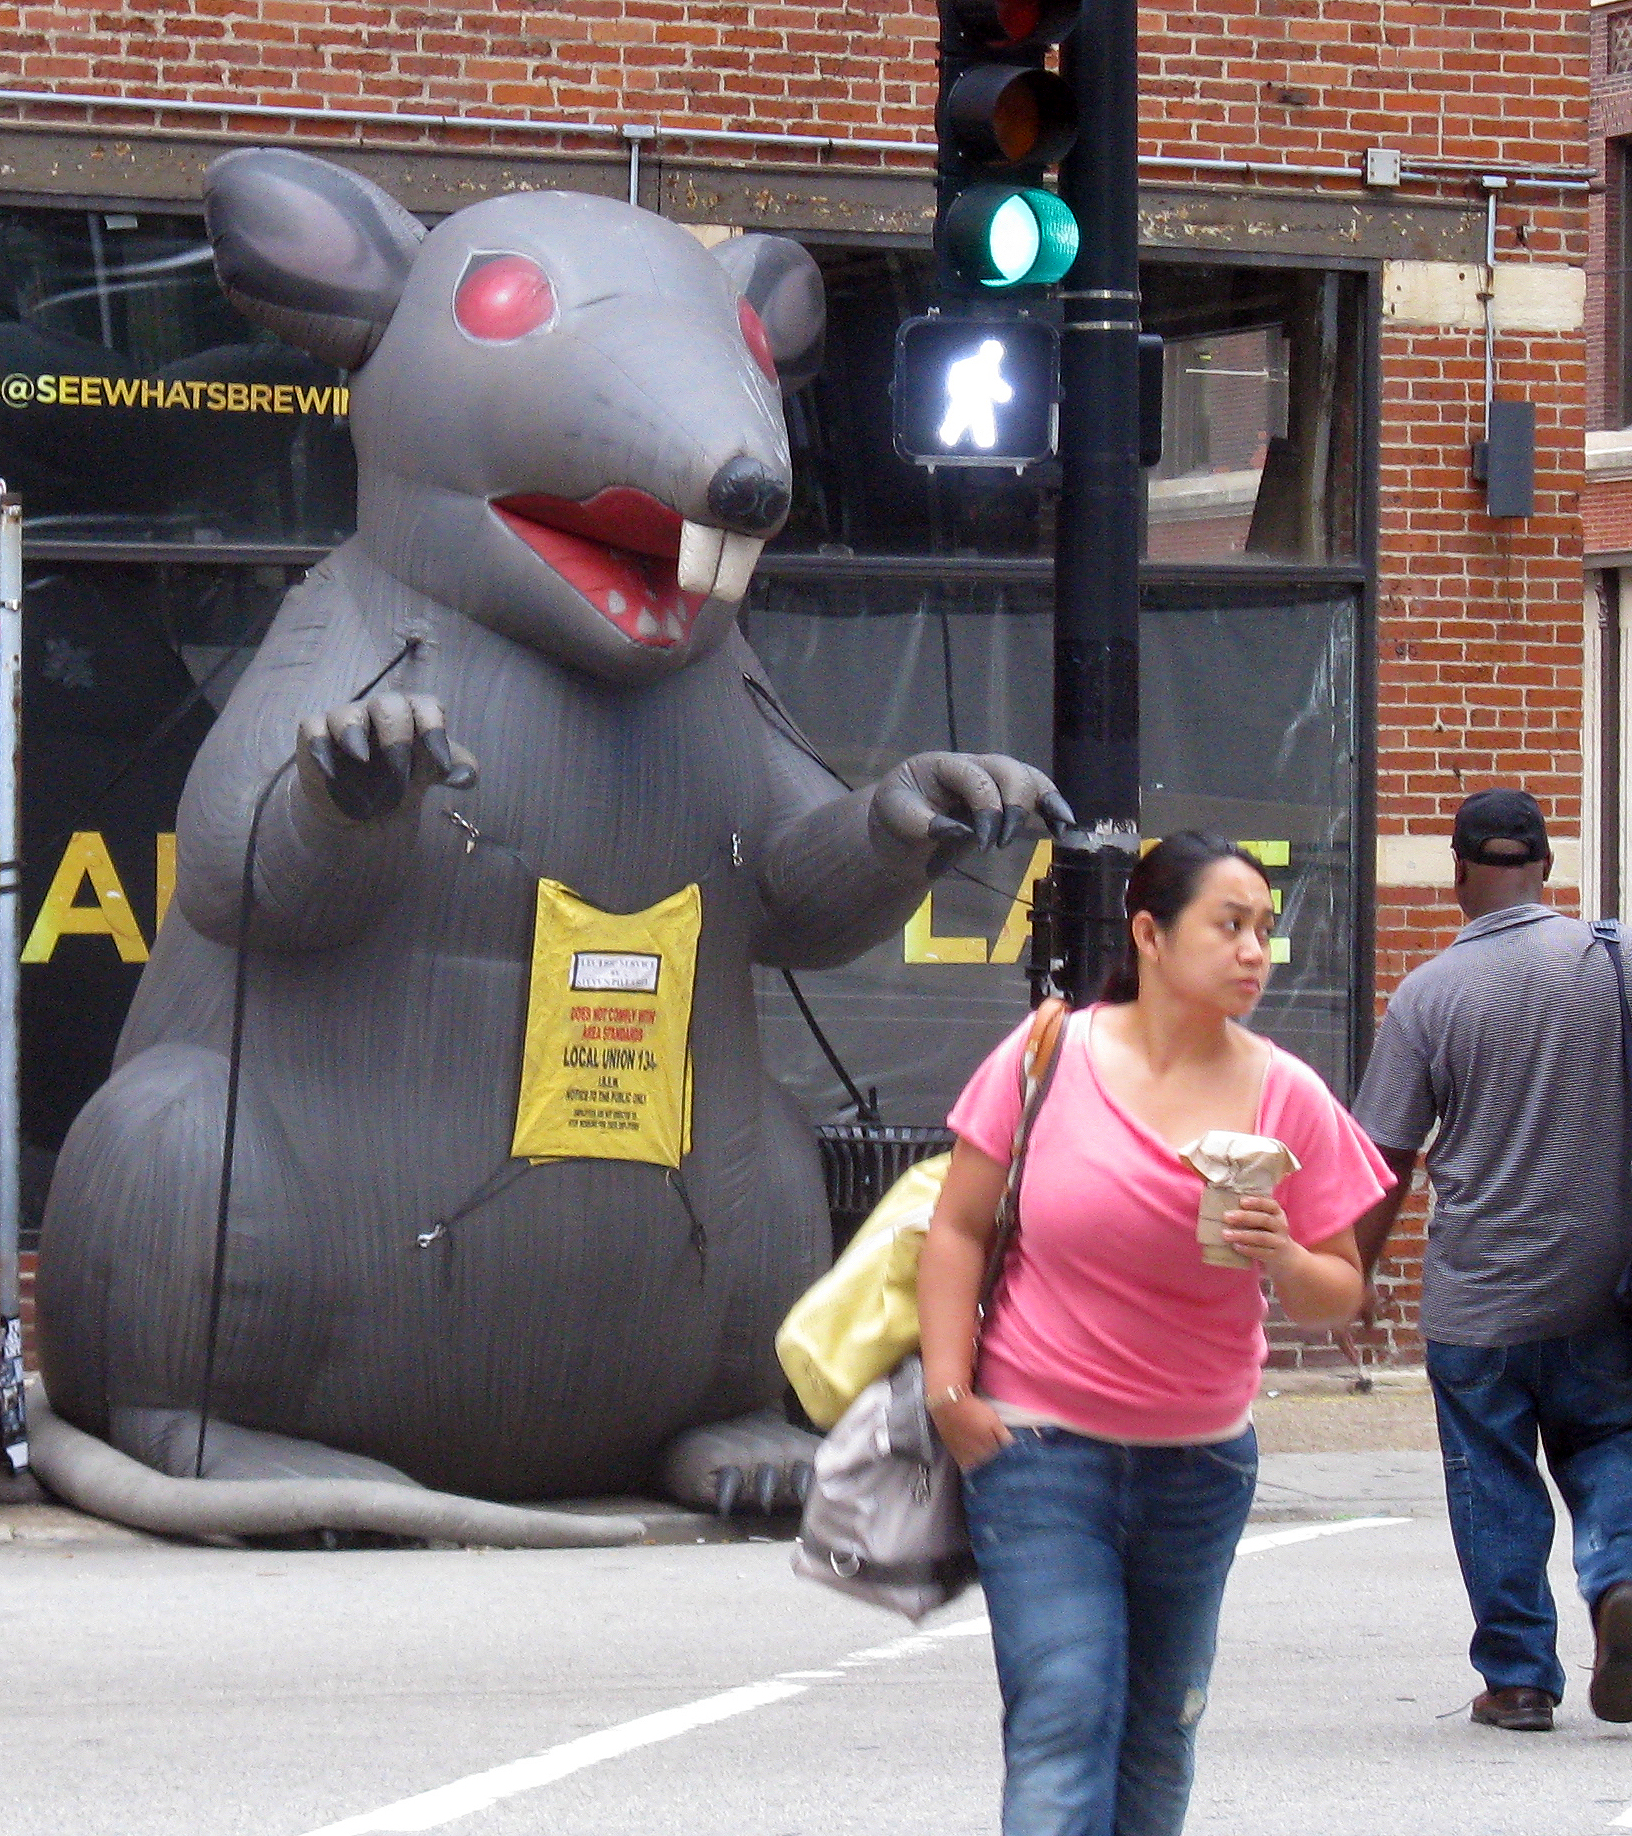 Look out Behind You! (Woman with Giant Rat